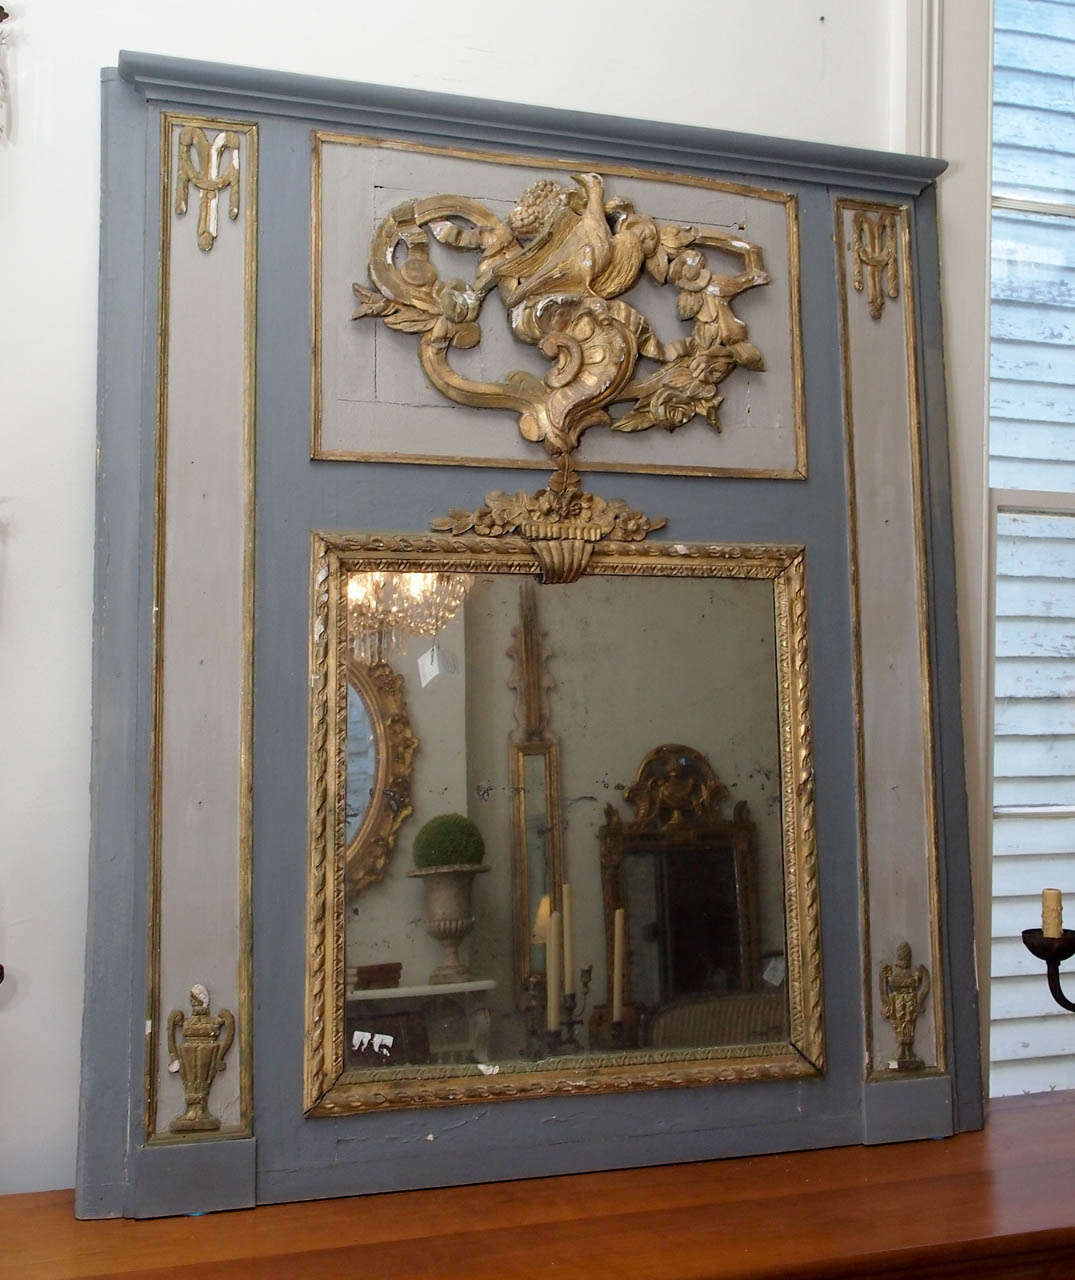 19th century trumeau mirror with carved gilt wood in a bird and flower motif and painted in blue and grey.